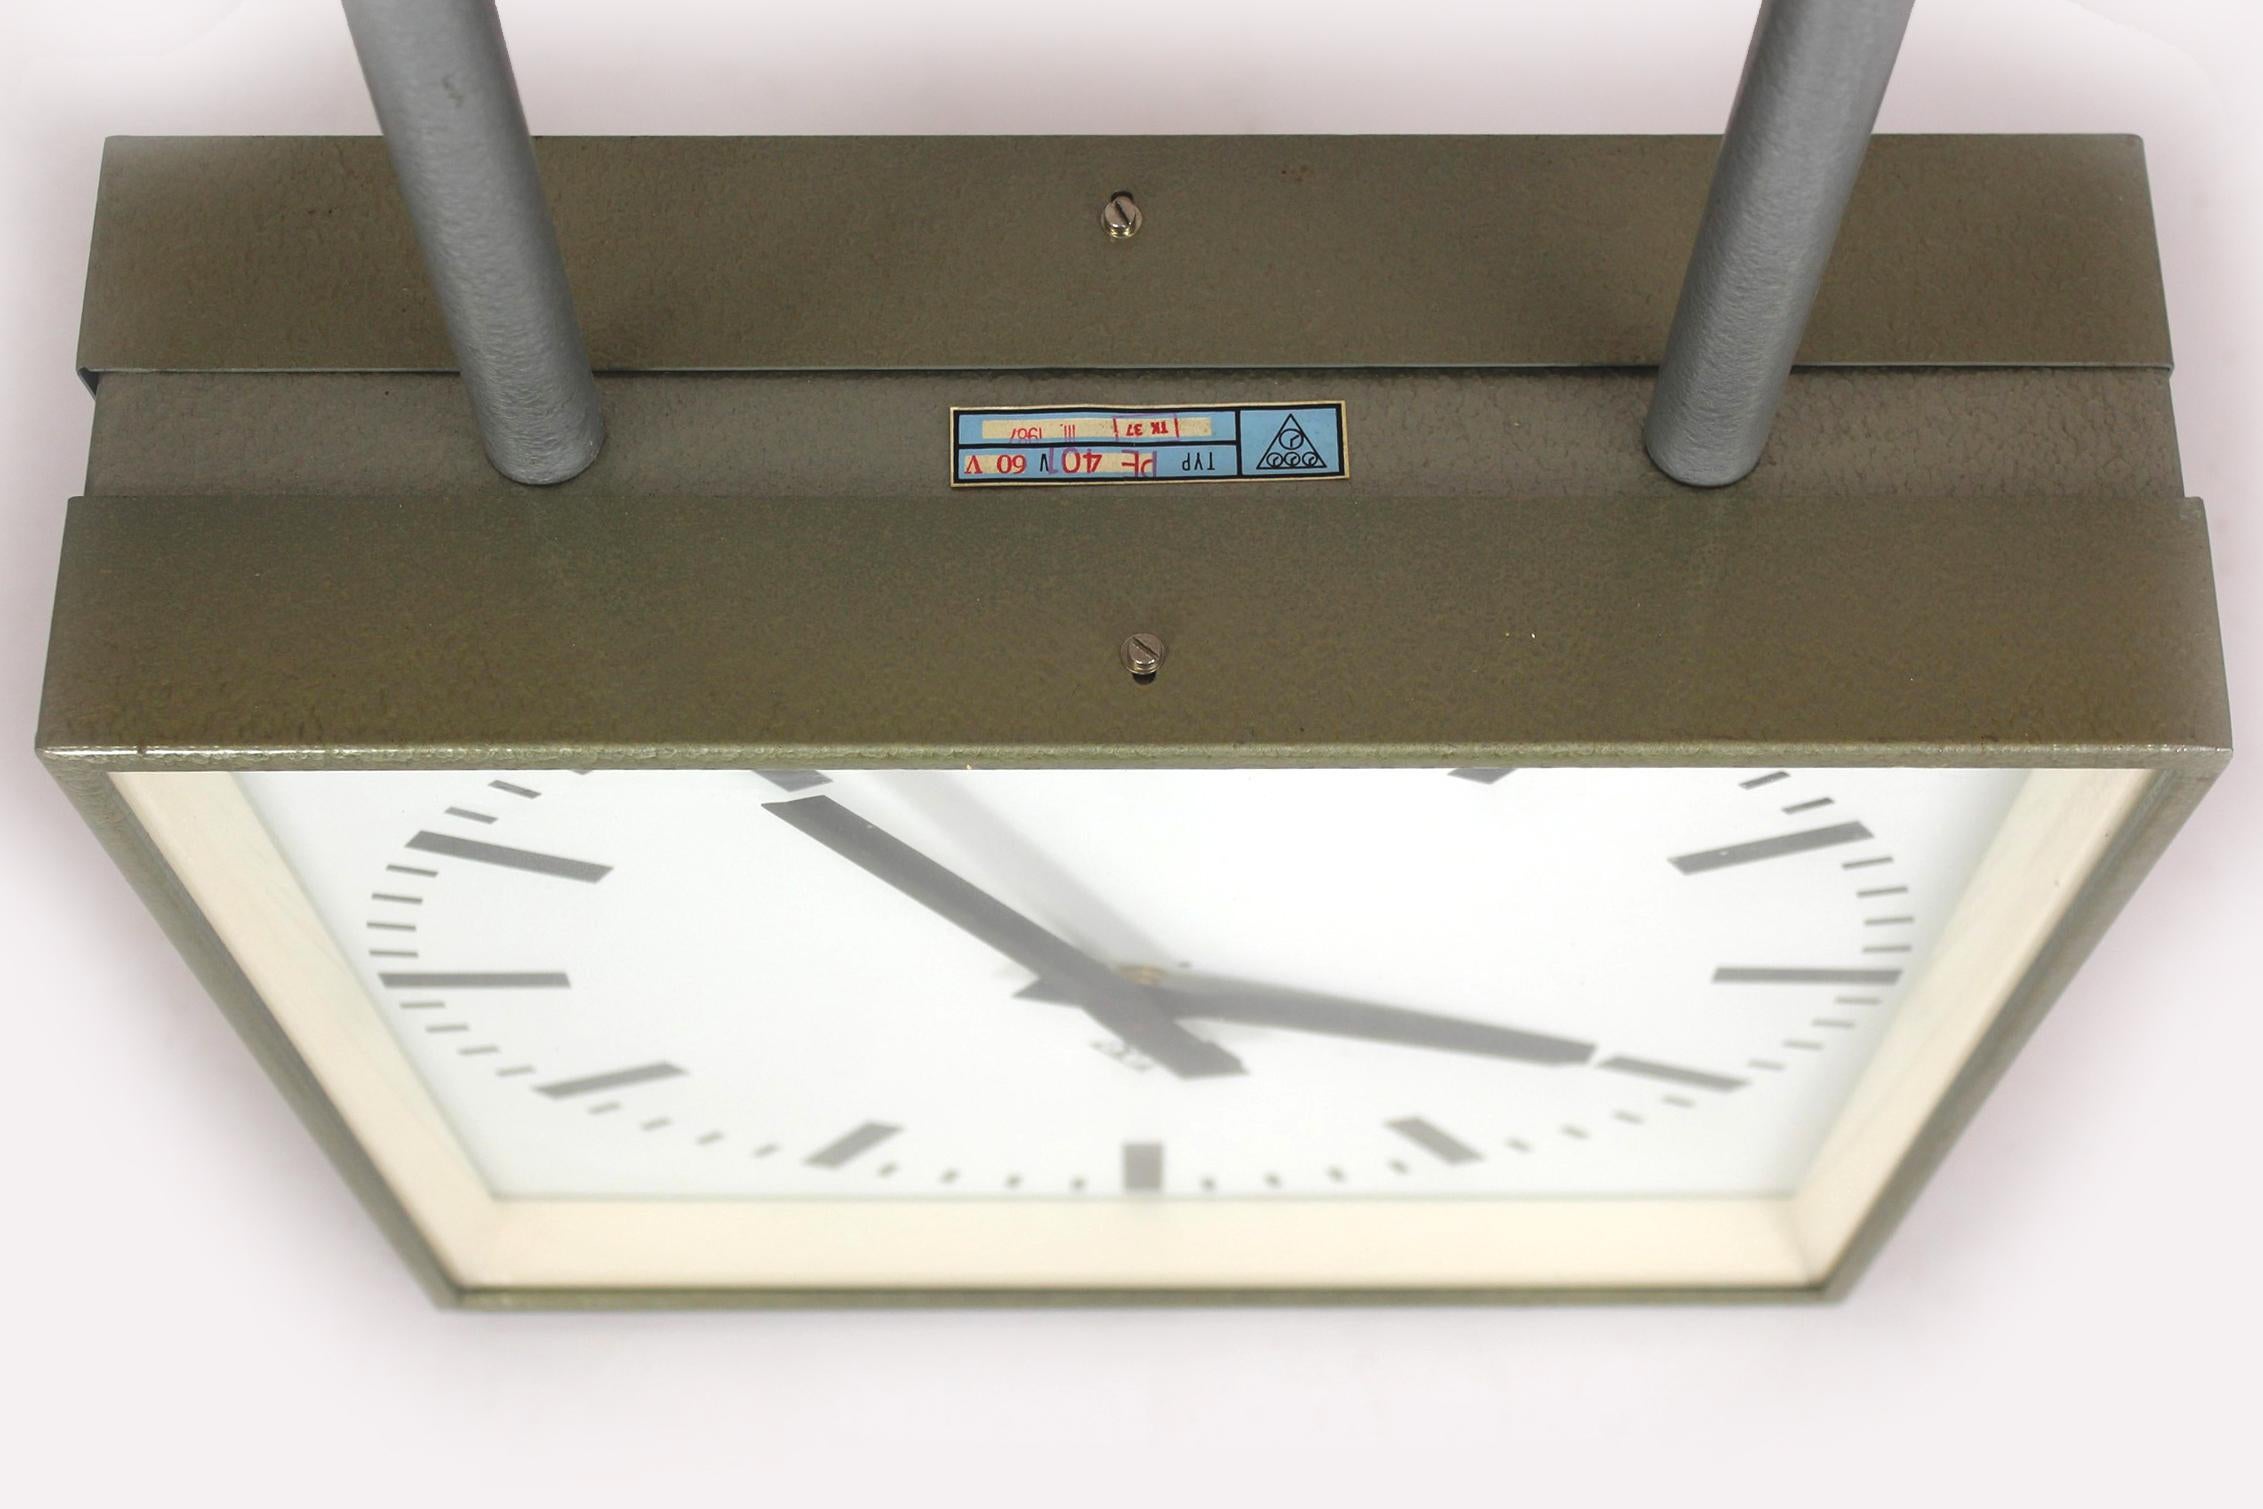 Large Double-Sided Railway Clock from Pragotron, 1980s (New, in box) For Sale 2